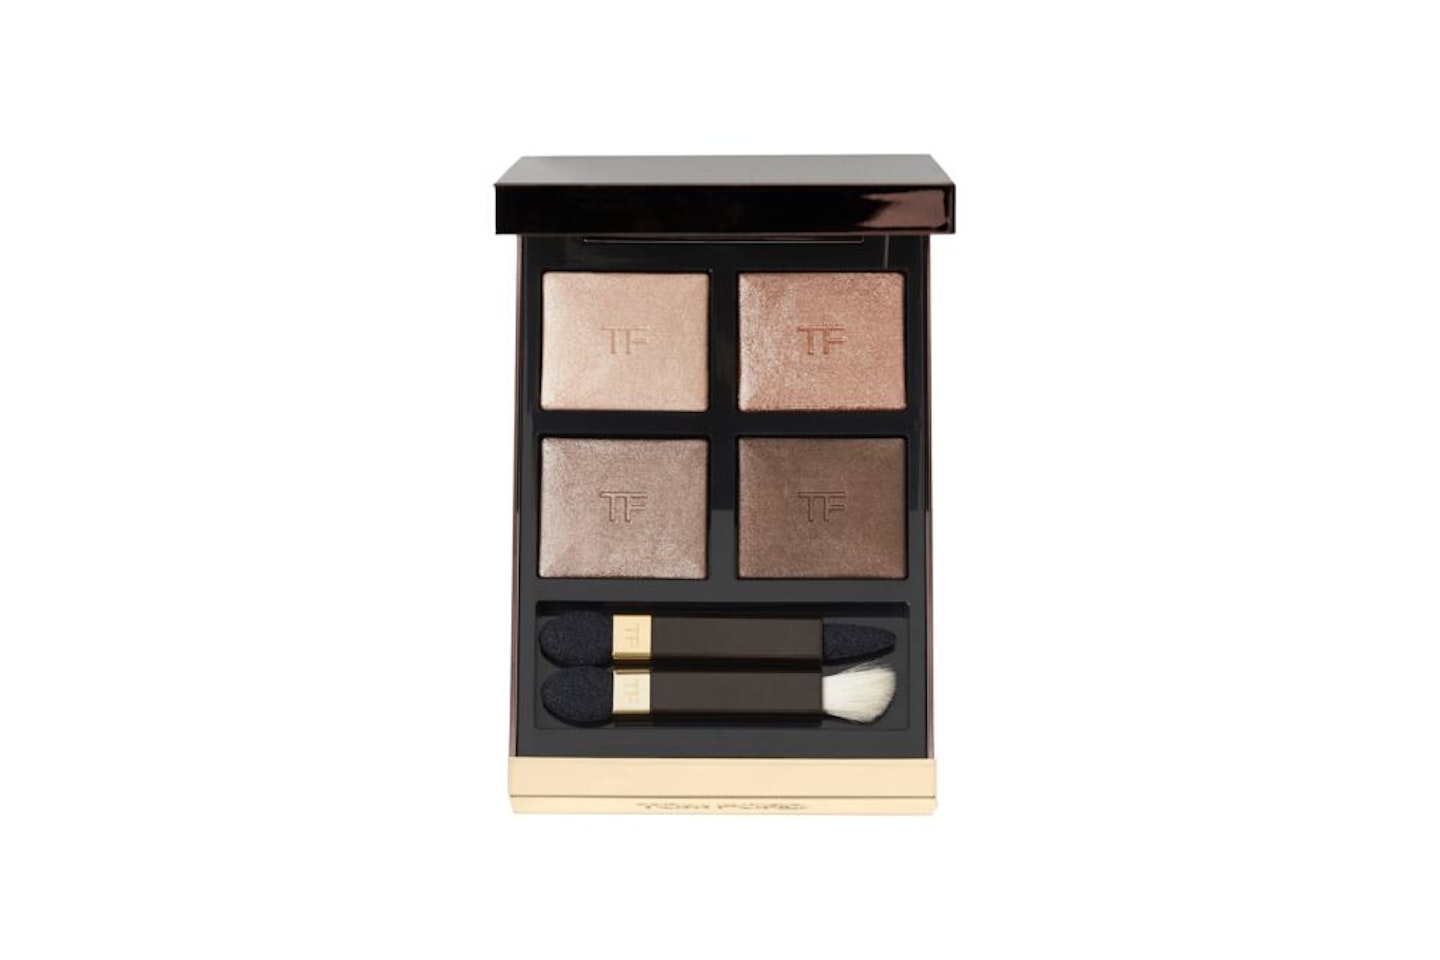 Tom Ford Eye Colour Quad in Nude Dip